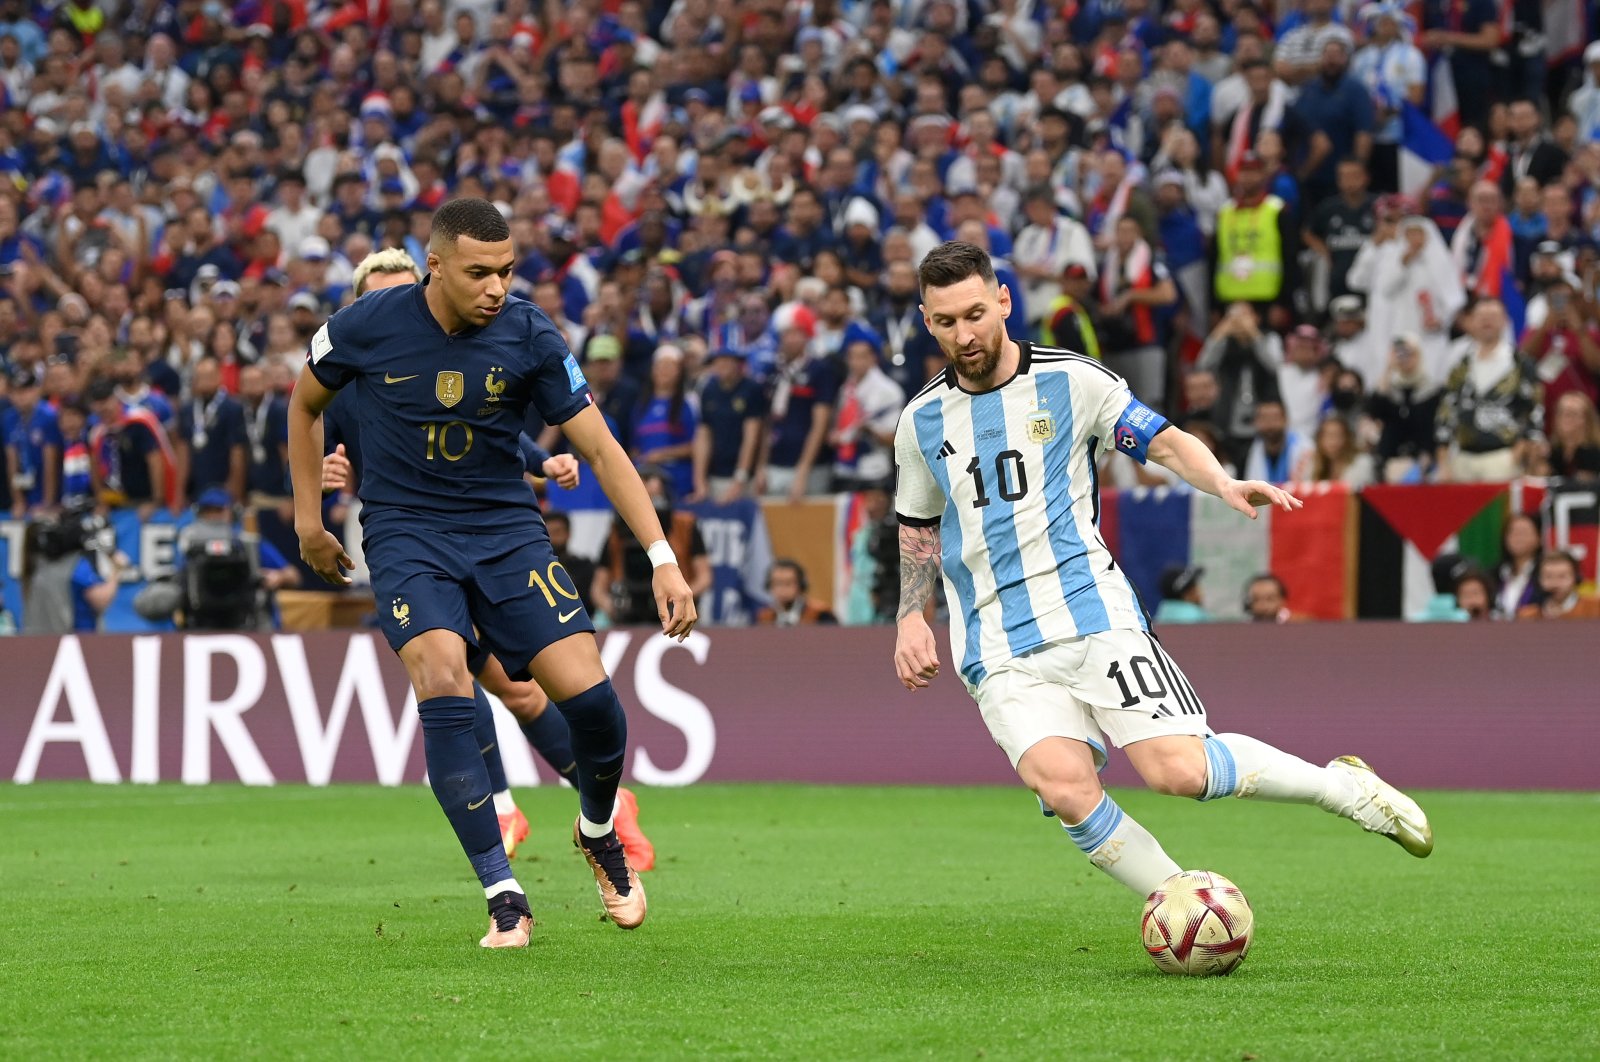 Argentina&#039;s Lionel Messi controls the ball against France&#039;s Kylian Mbappe during the FIFA World Cup Qatar 2022 final match between Argentina and France at Lusail Stadium, Lusail City, Qatar, Dec. 18, 2022. (Getty Images Photo)